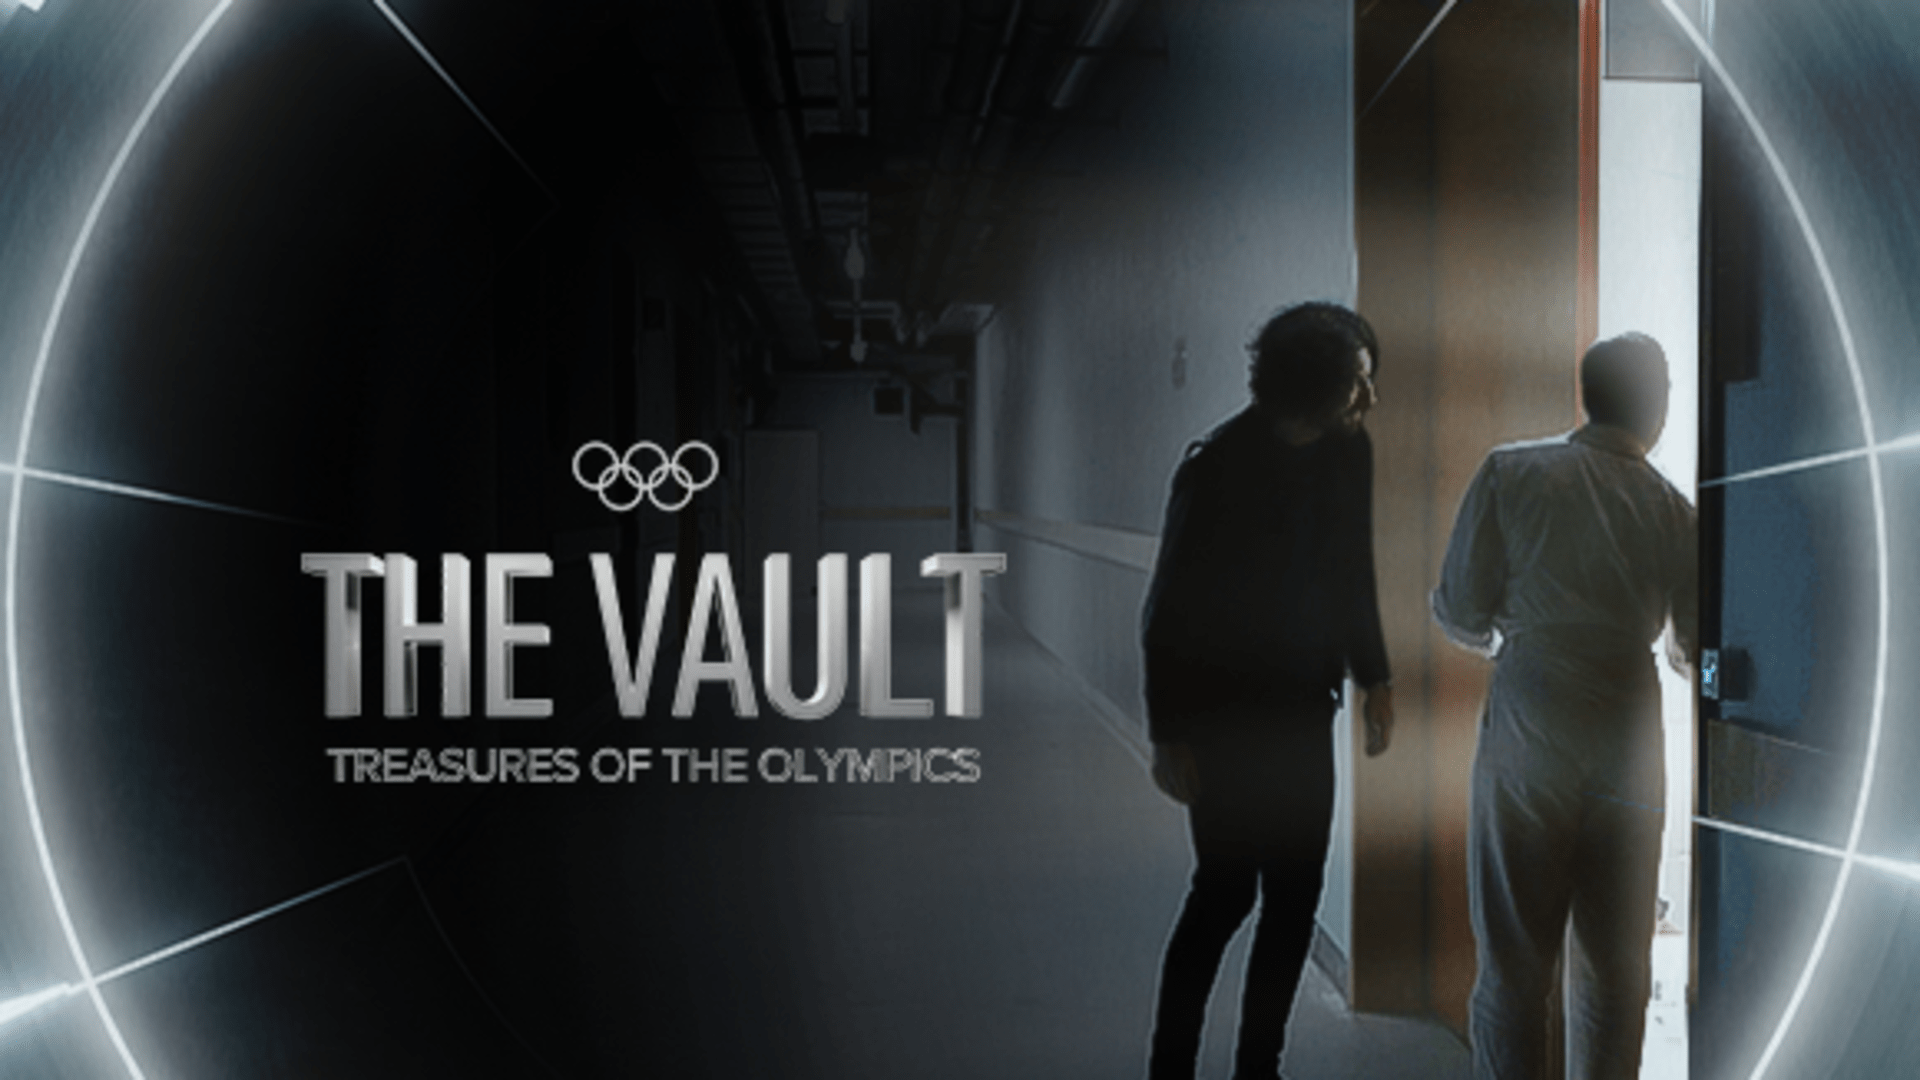 The Vault treasures of the Olympics teaser